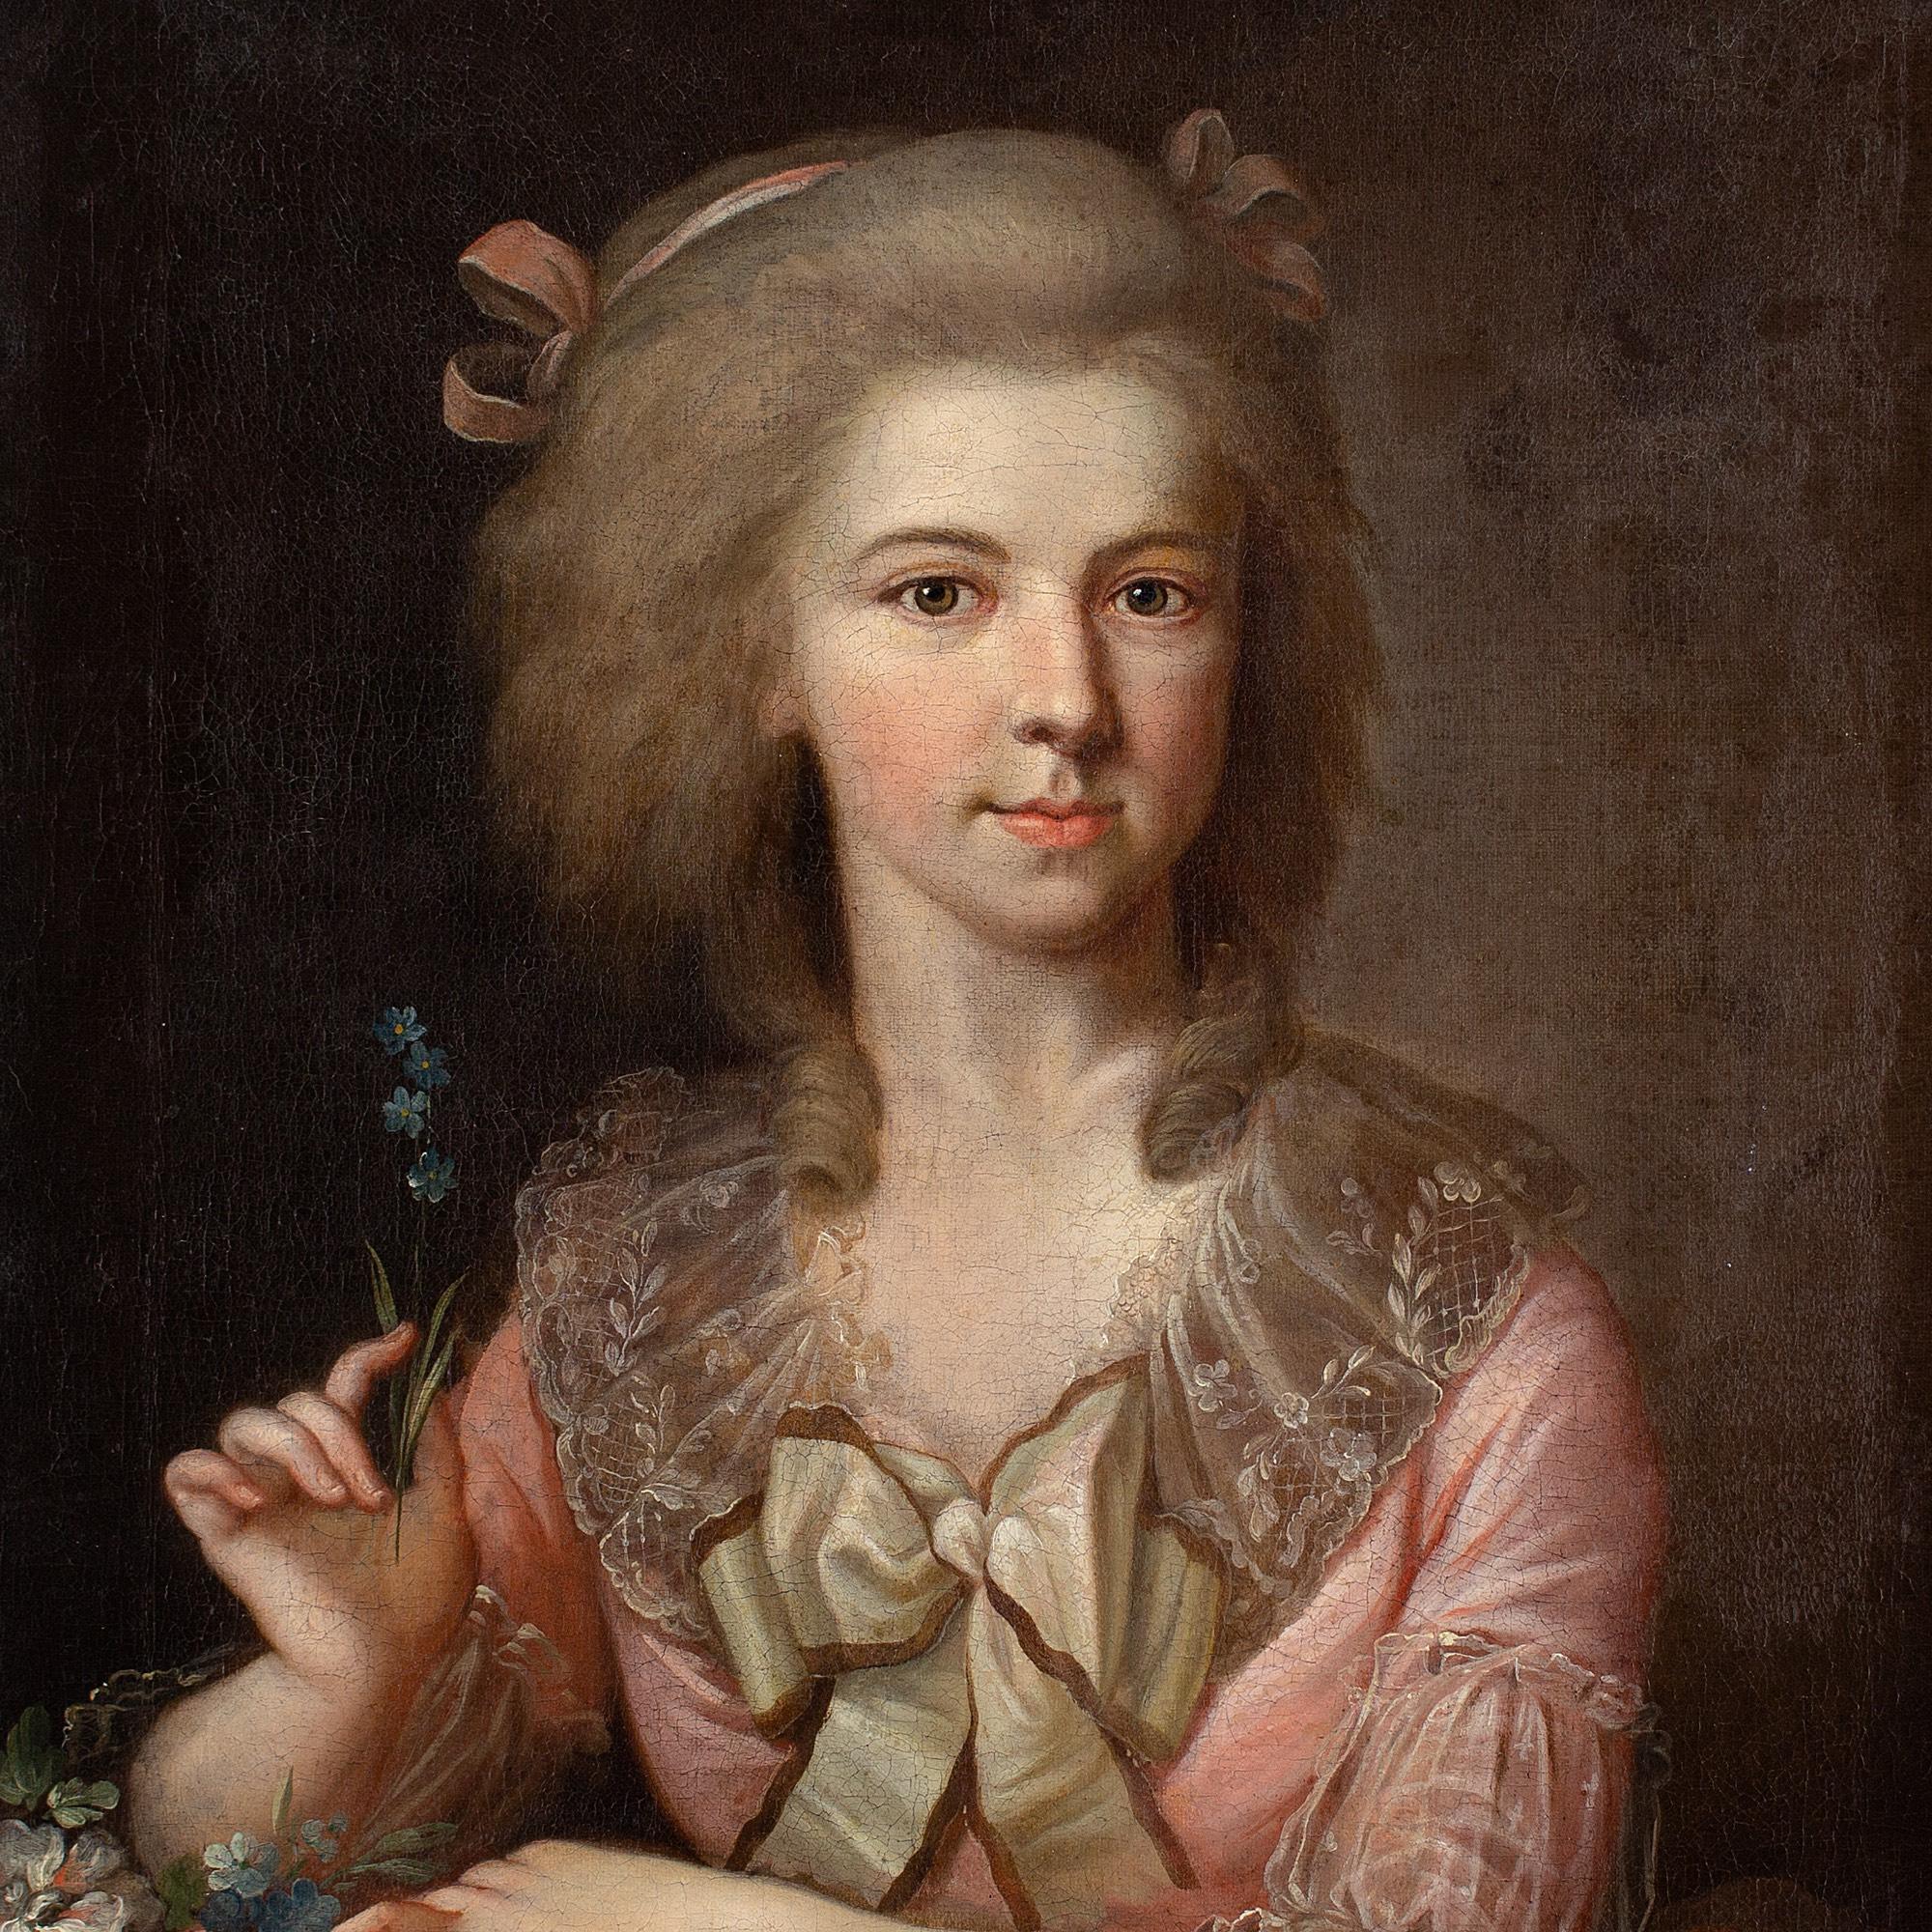 This beautiful late 18th-century portrait depicts a young lady holding forget-me-nots.

Exquisitely attired in a lavish pink dress, she’s the personification of elegance. In her right hand, a small posy of forget-me-nots, a symbol of enduring love